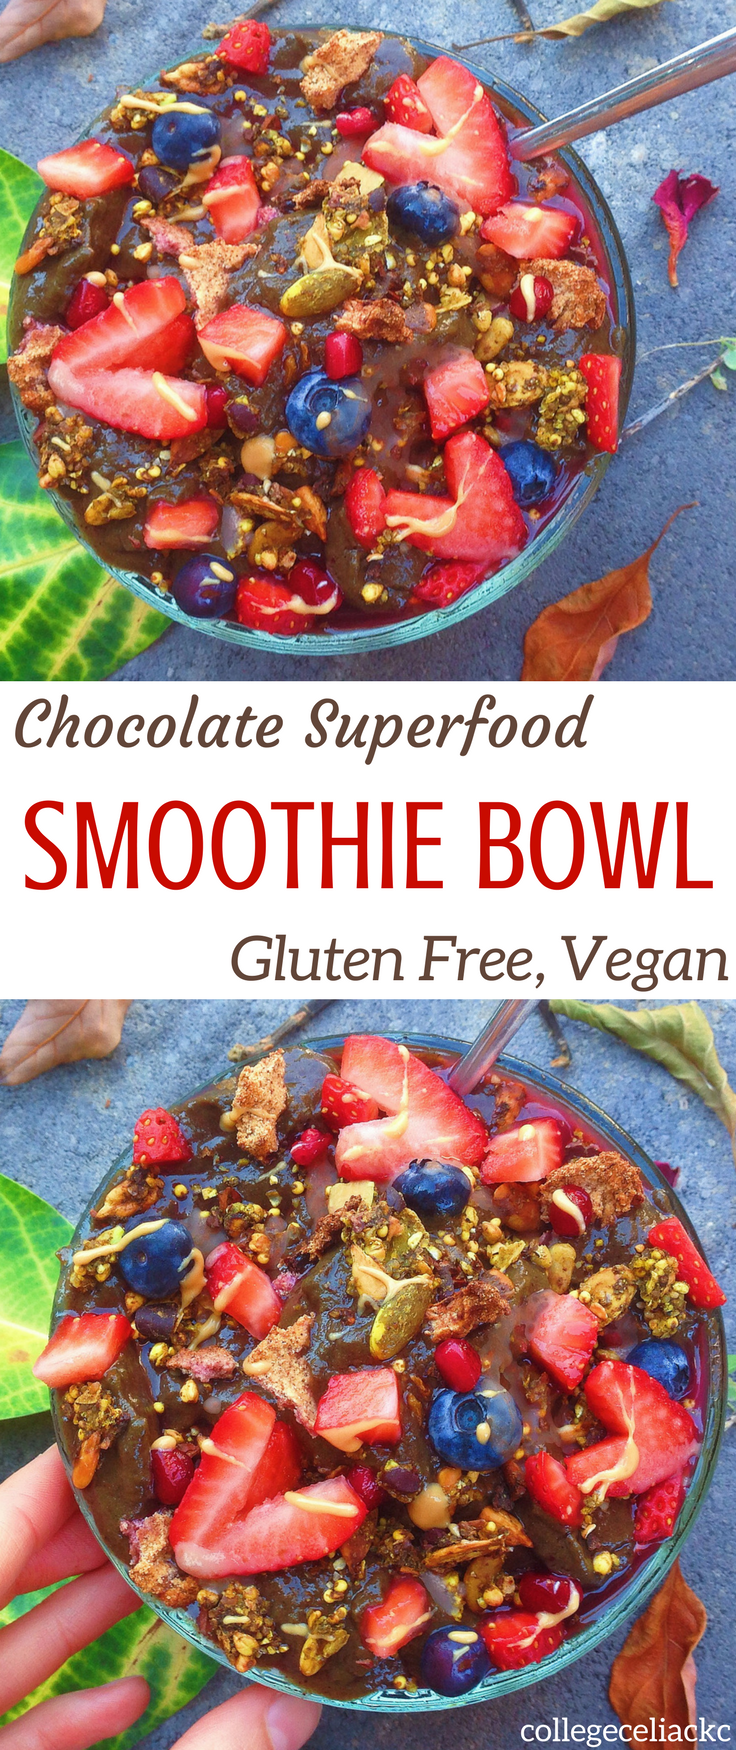 Craving a chocolate smoothie bowl that is also #glutenfree, #vegan & #healthy? This #smoothiebowl tastes like dessert but is loaded with superfoods!